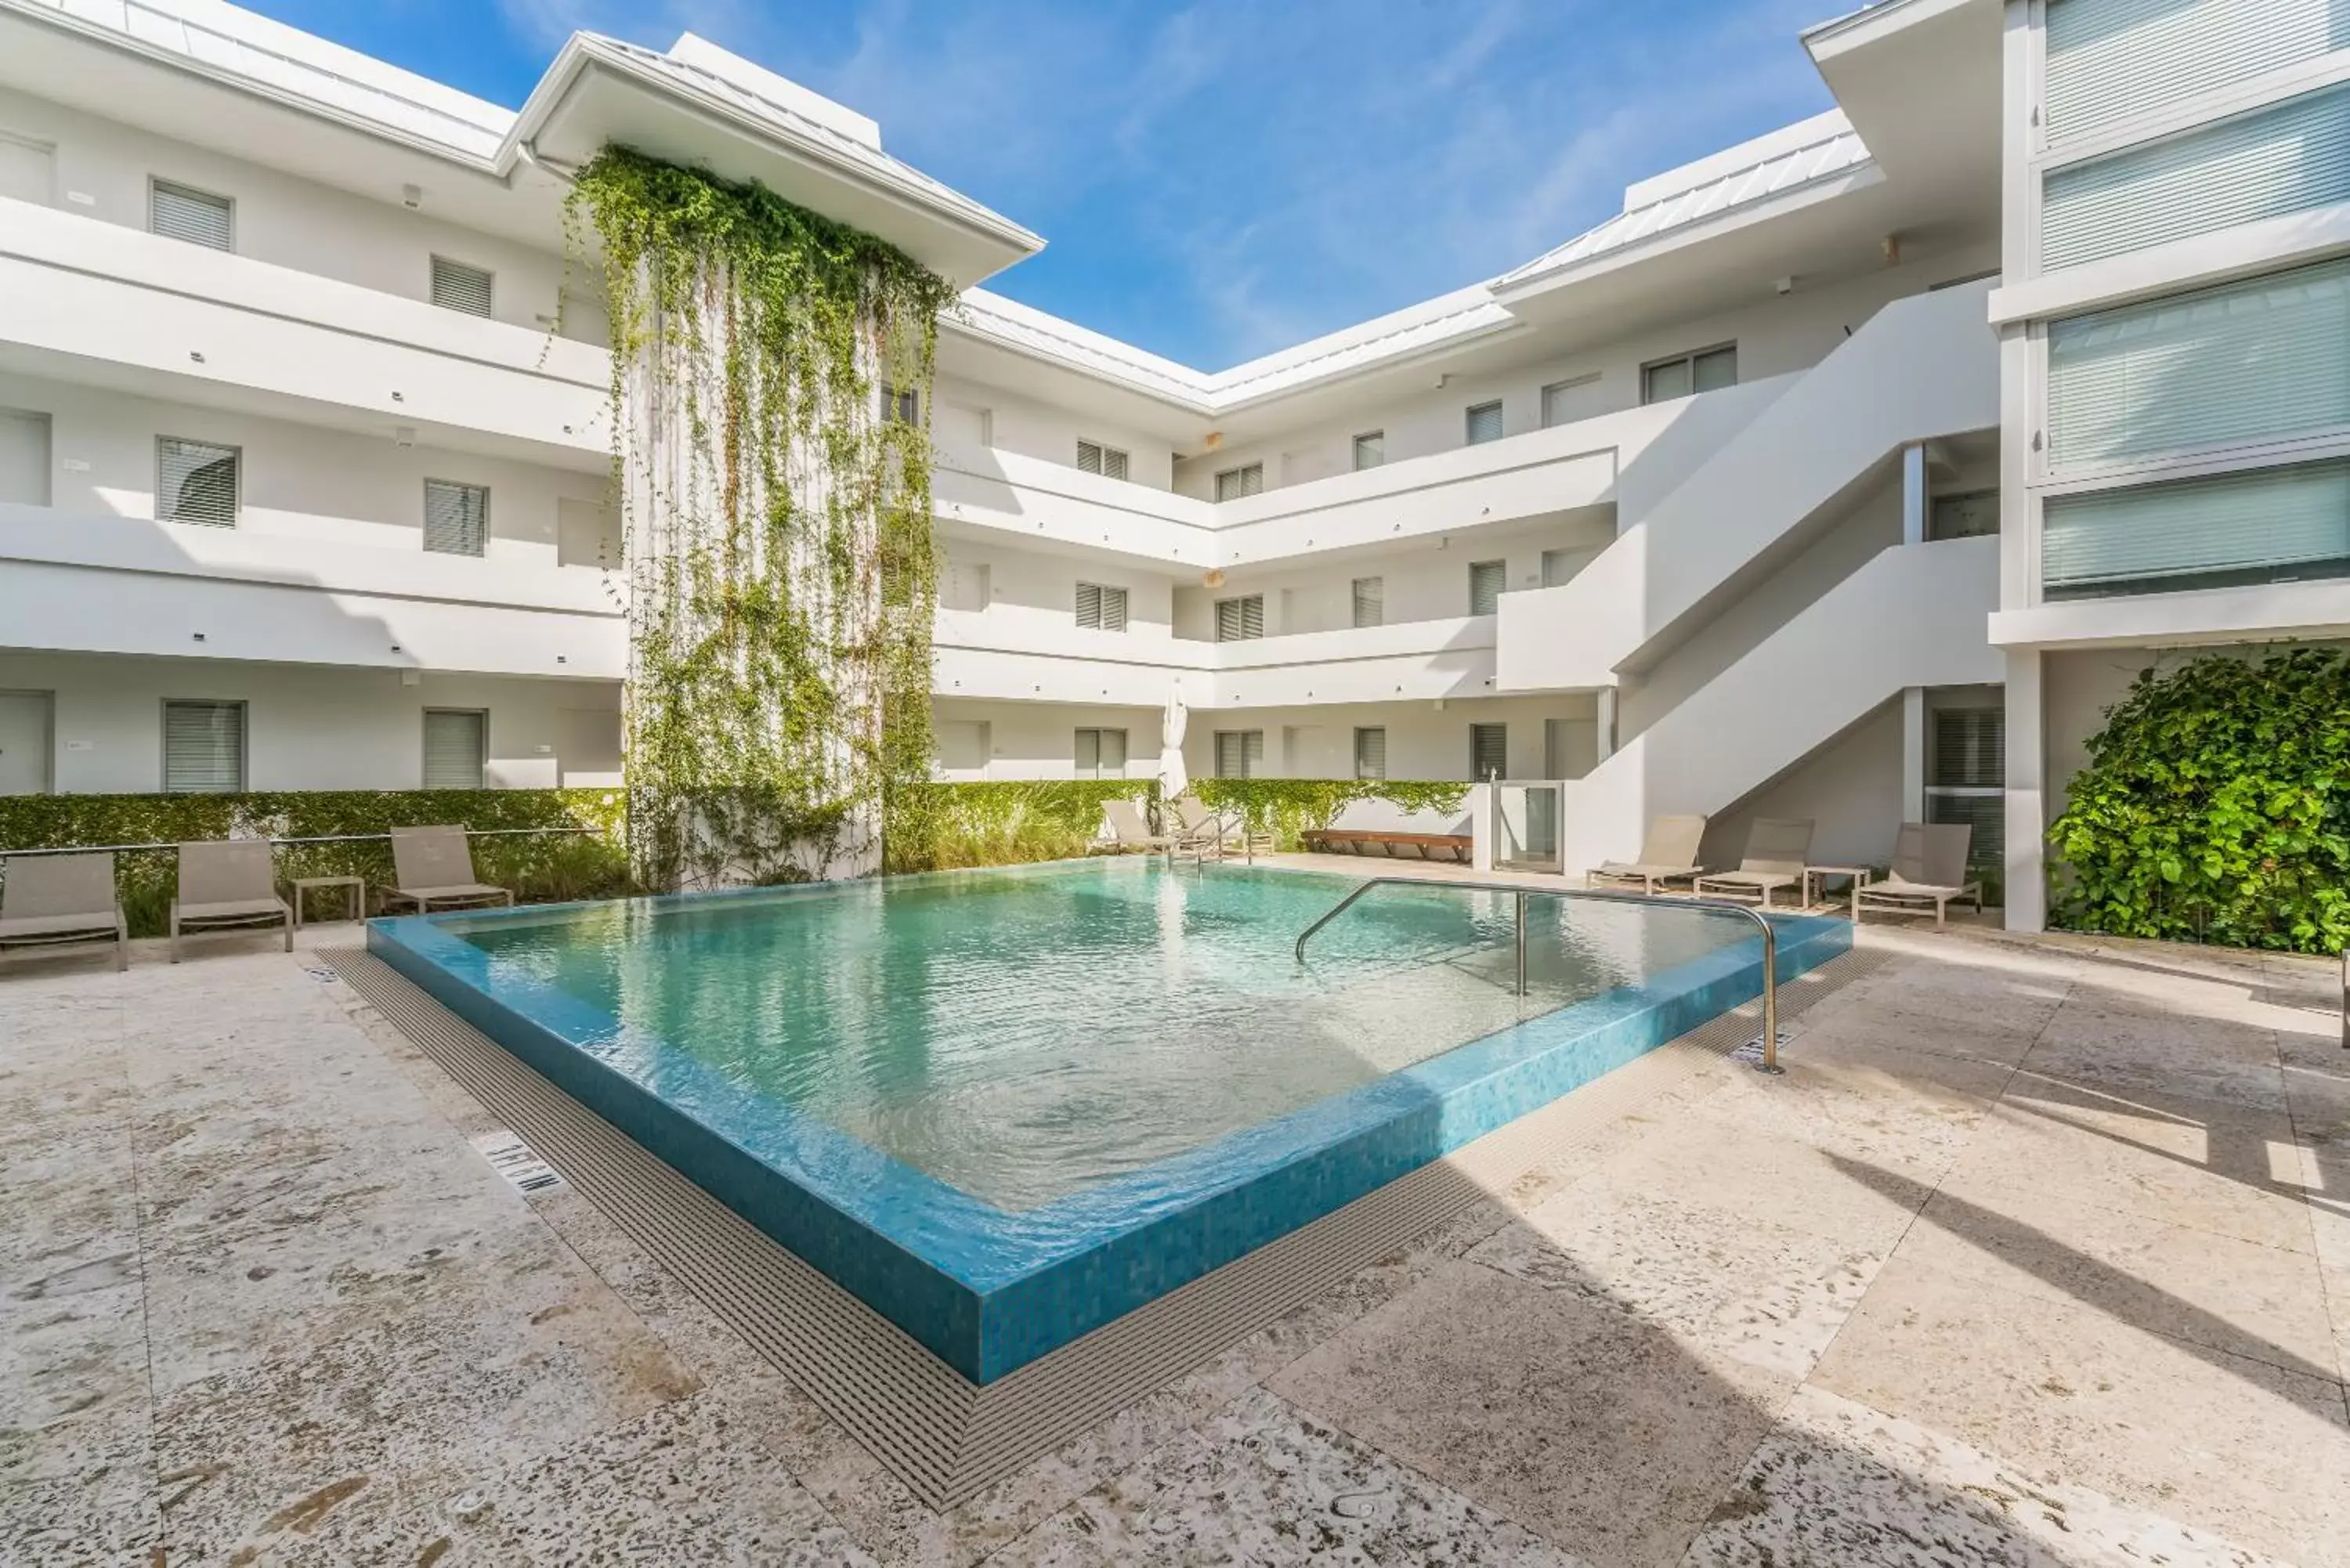 Swimming Pool in Beach Haus Key Biscayne Contemporary Apartments